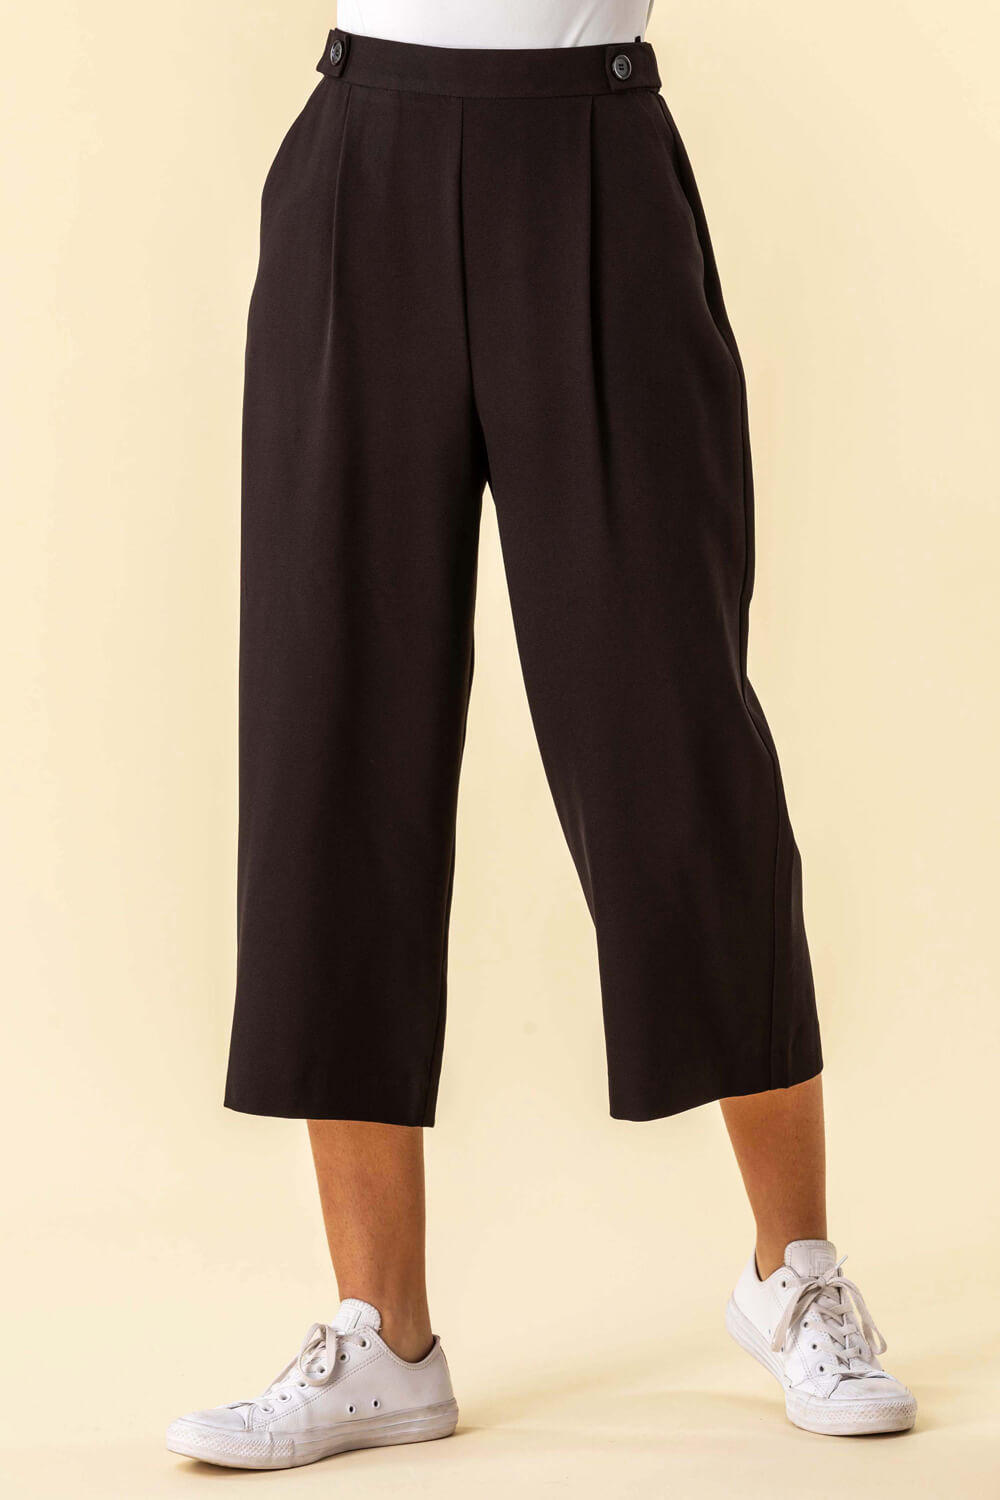 Buy Black Jersey Culotte Trousers from Next Luxembourg